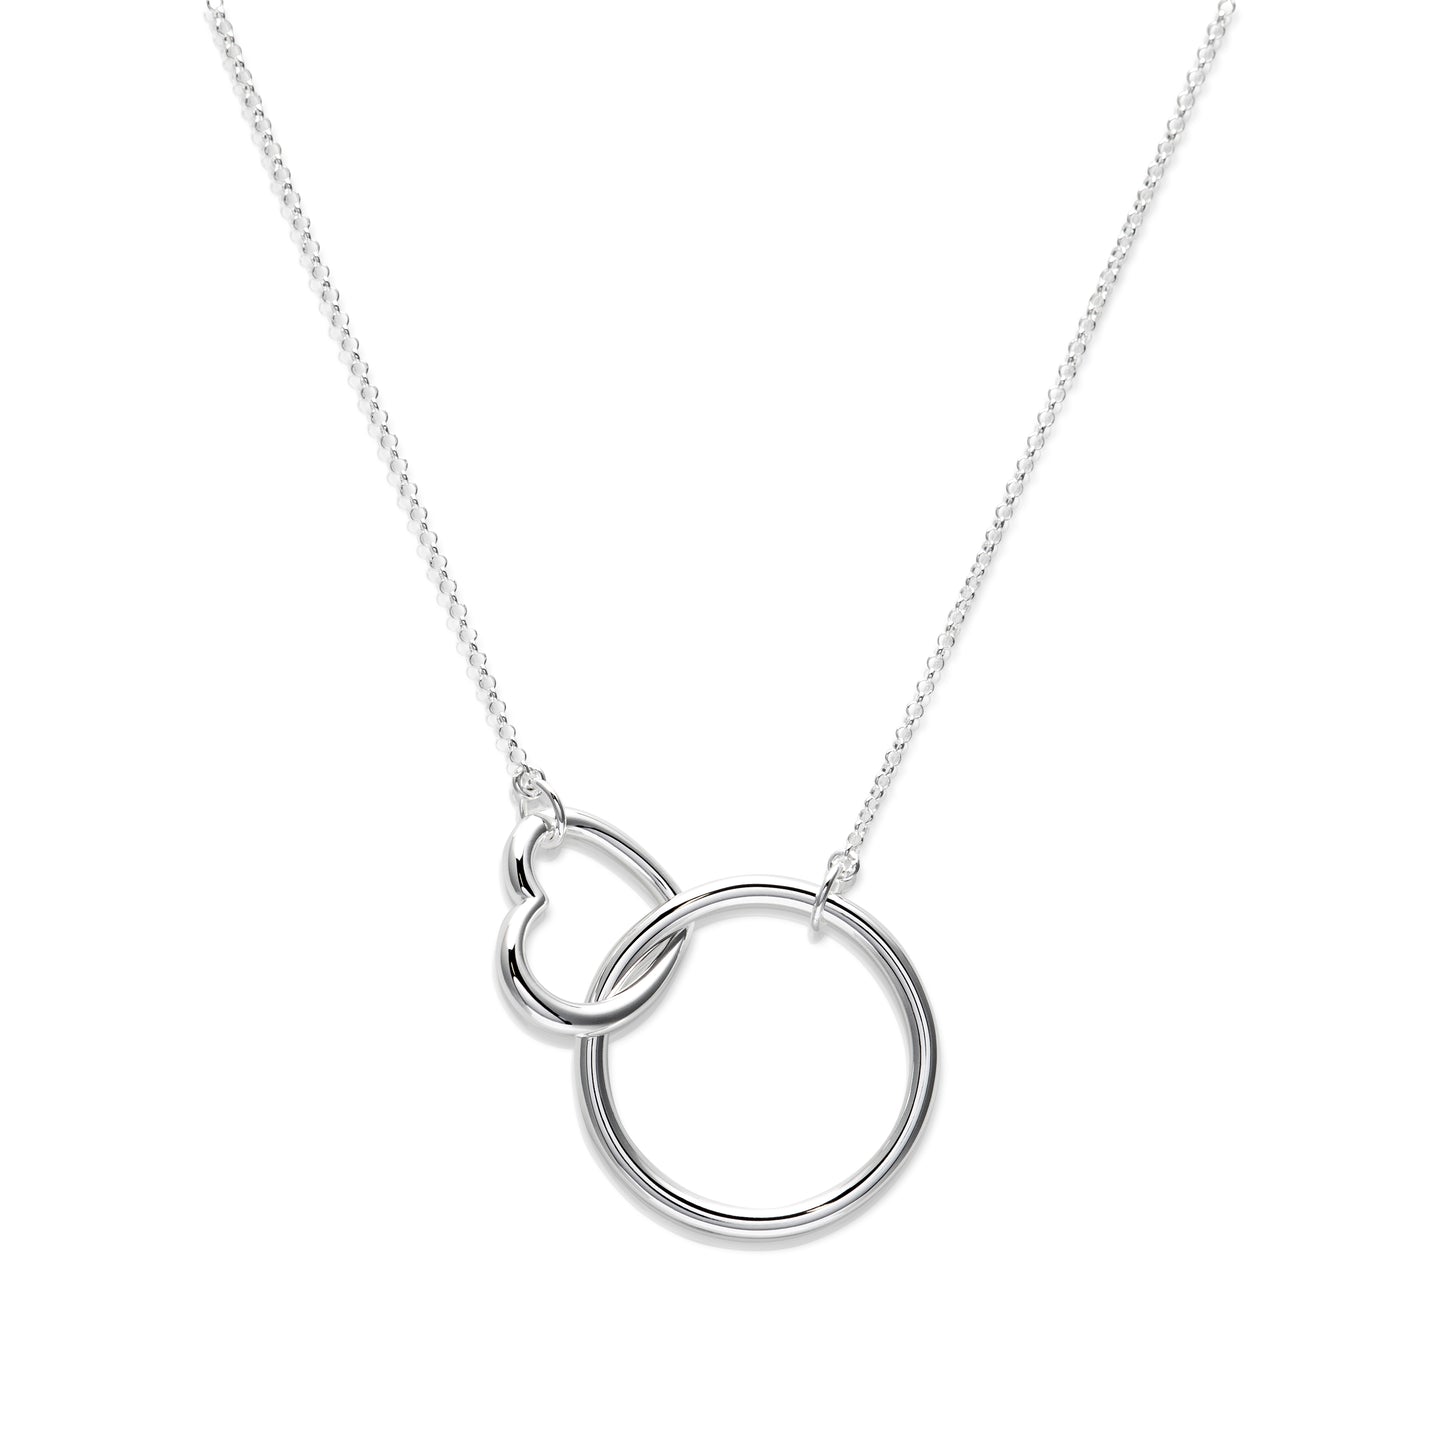 Silver interlocking circle and heart necklace